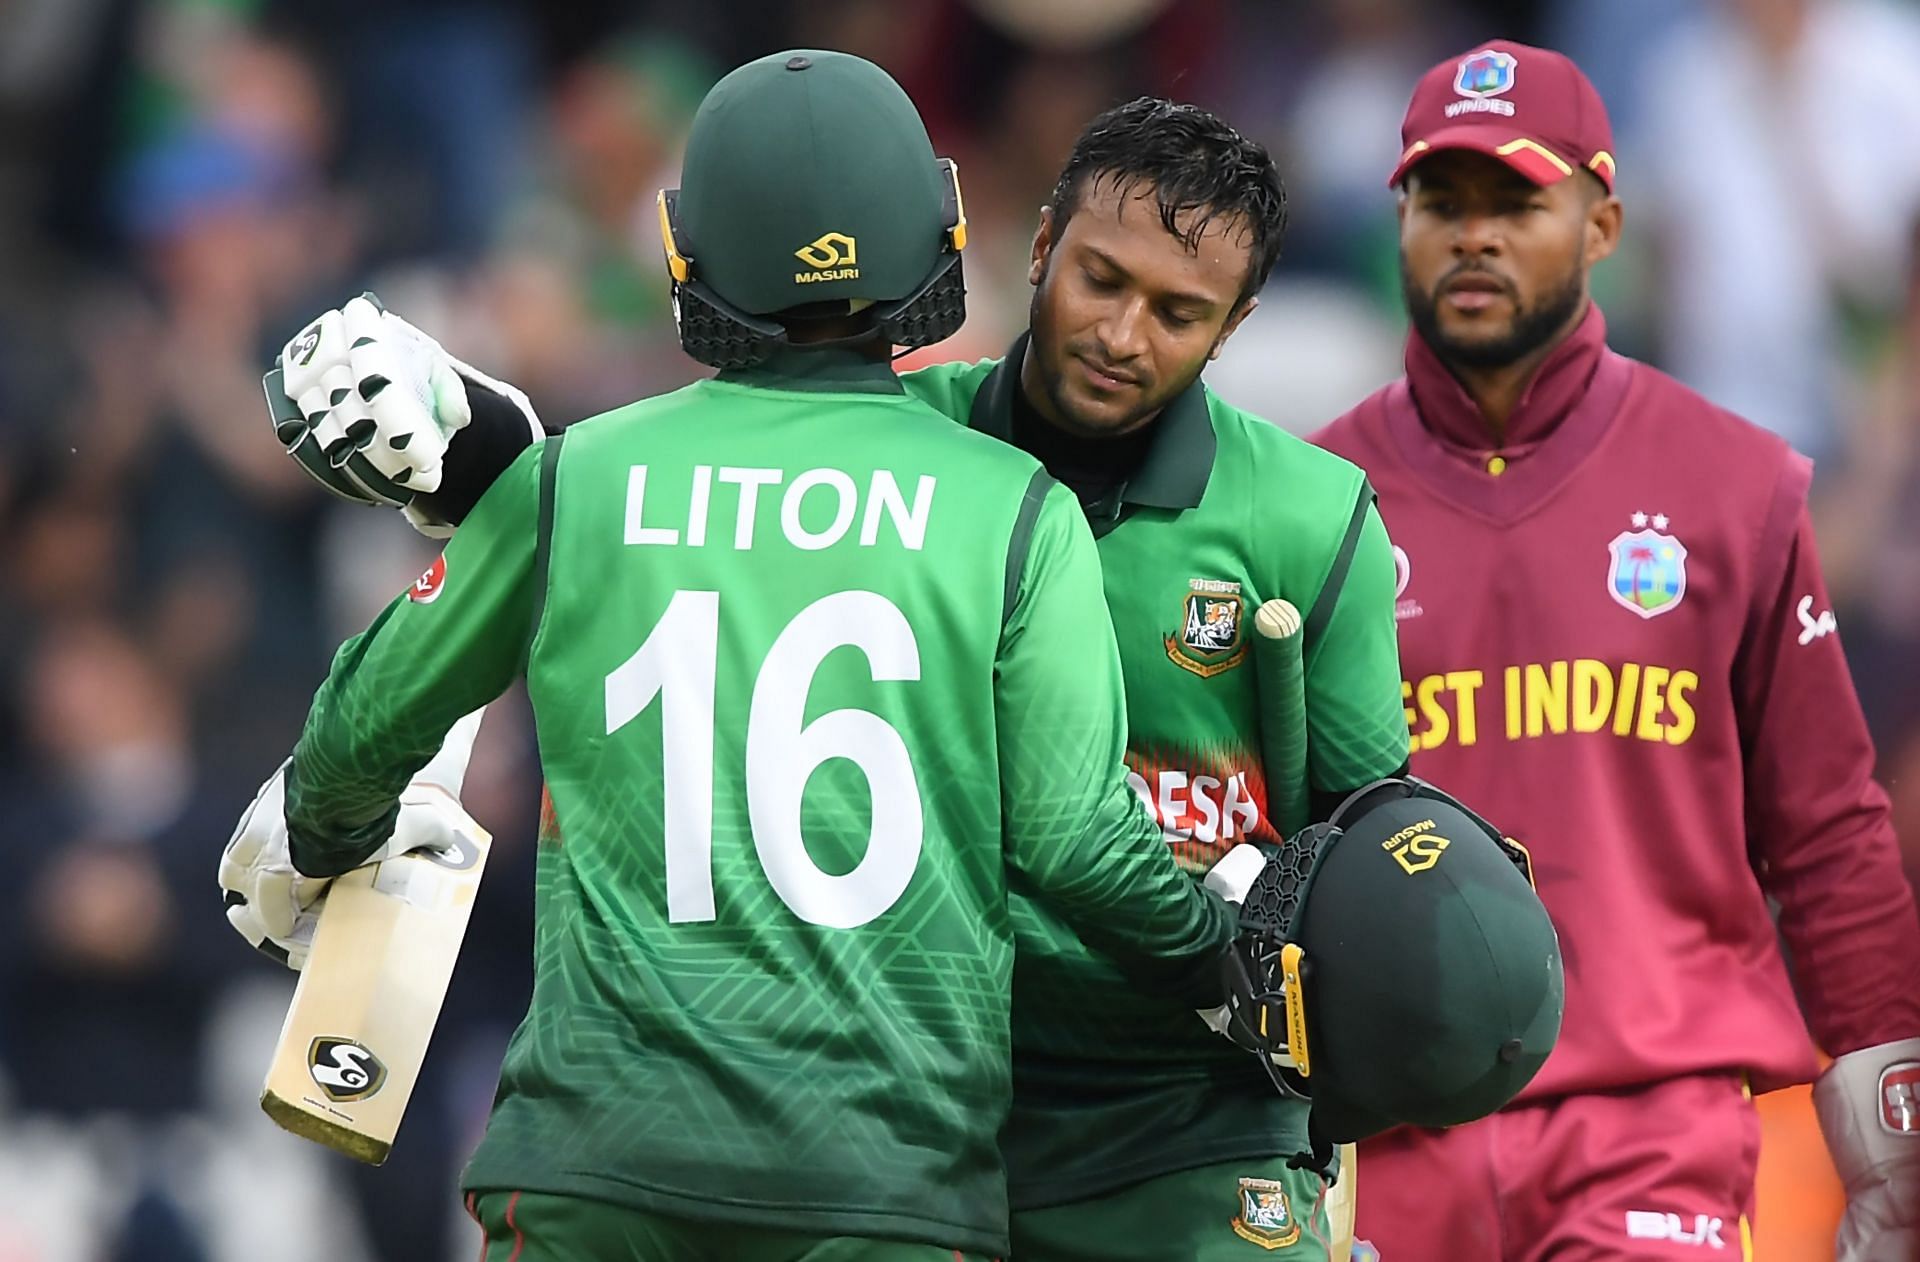 Shakib Al Hasan will be the player to watch out for in the West Indies vs Bangladesh T20 World Cup 2021 match